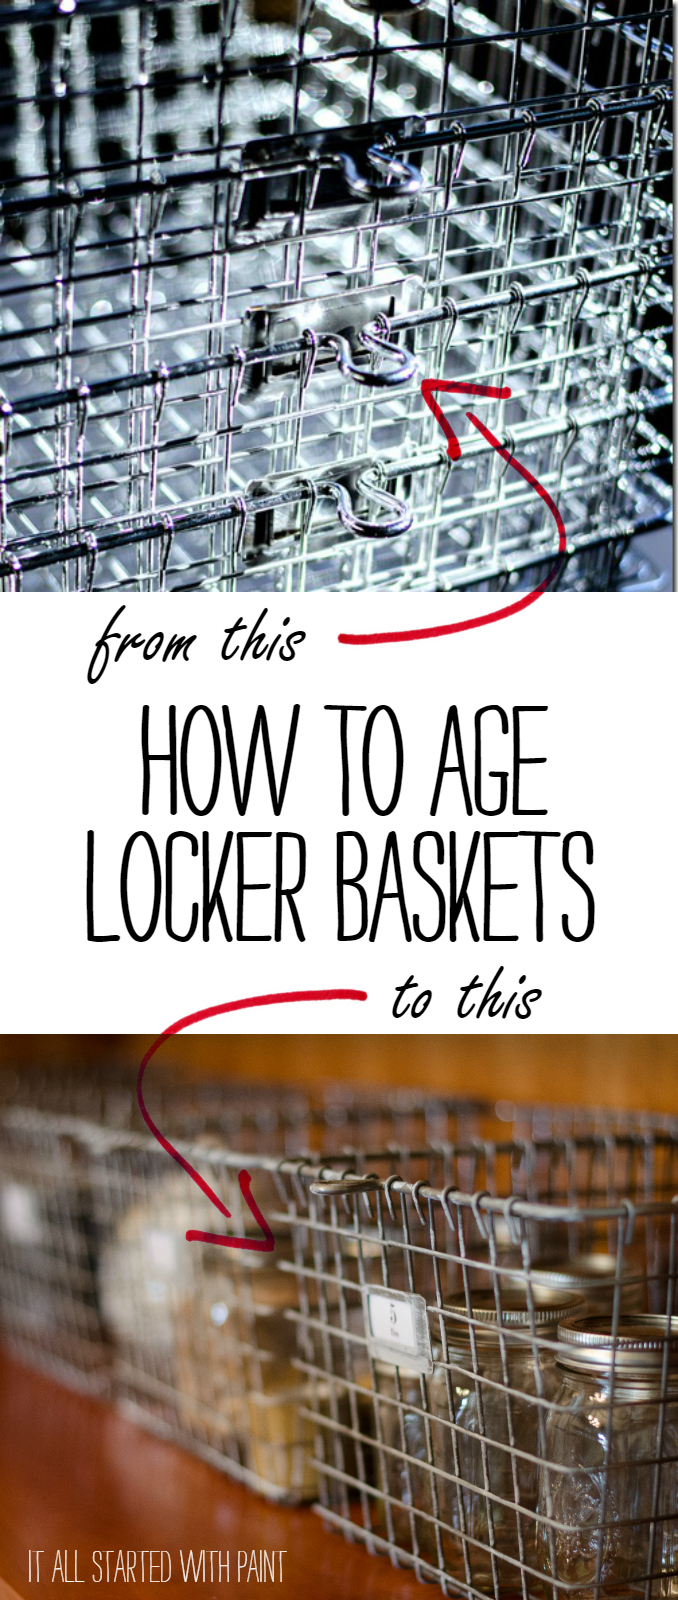 How To Turn Shiny, New Locker Baskets Into Aged, Vintage Look